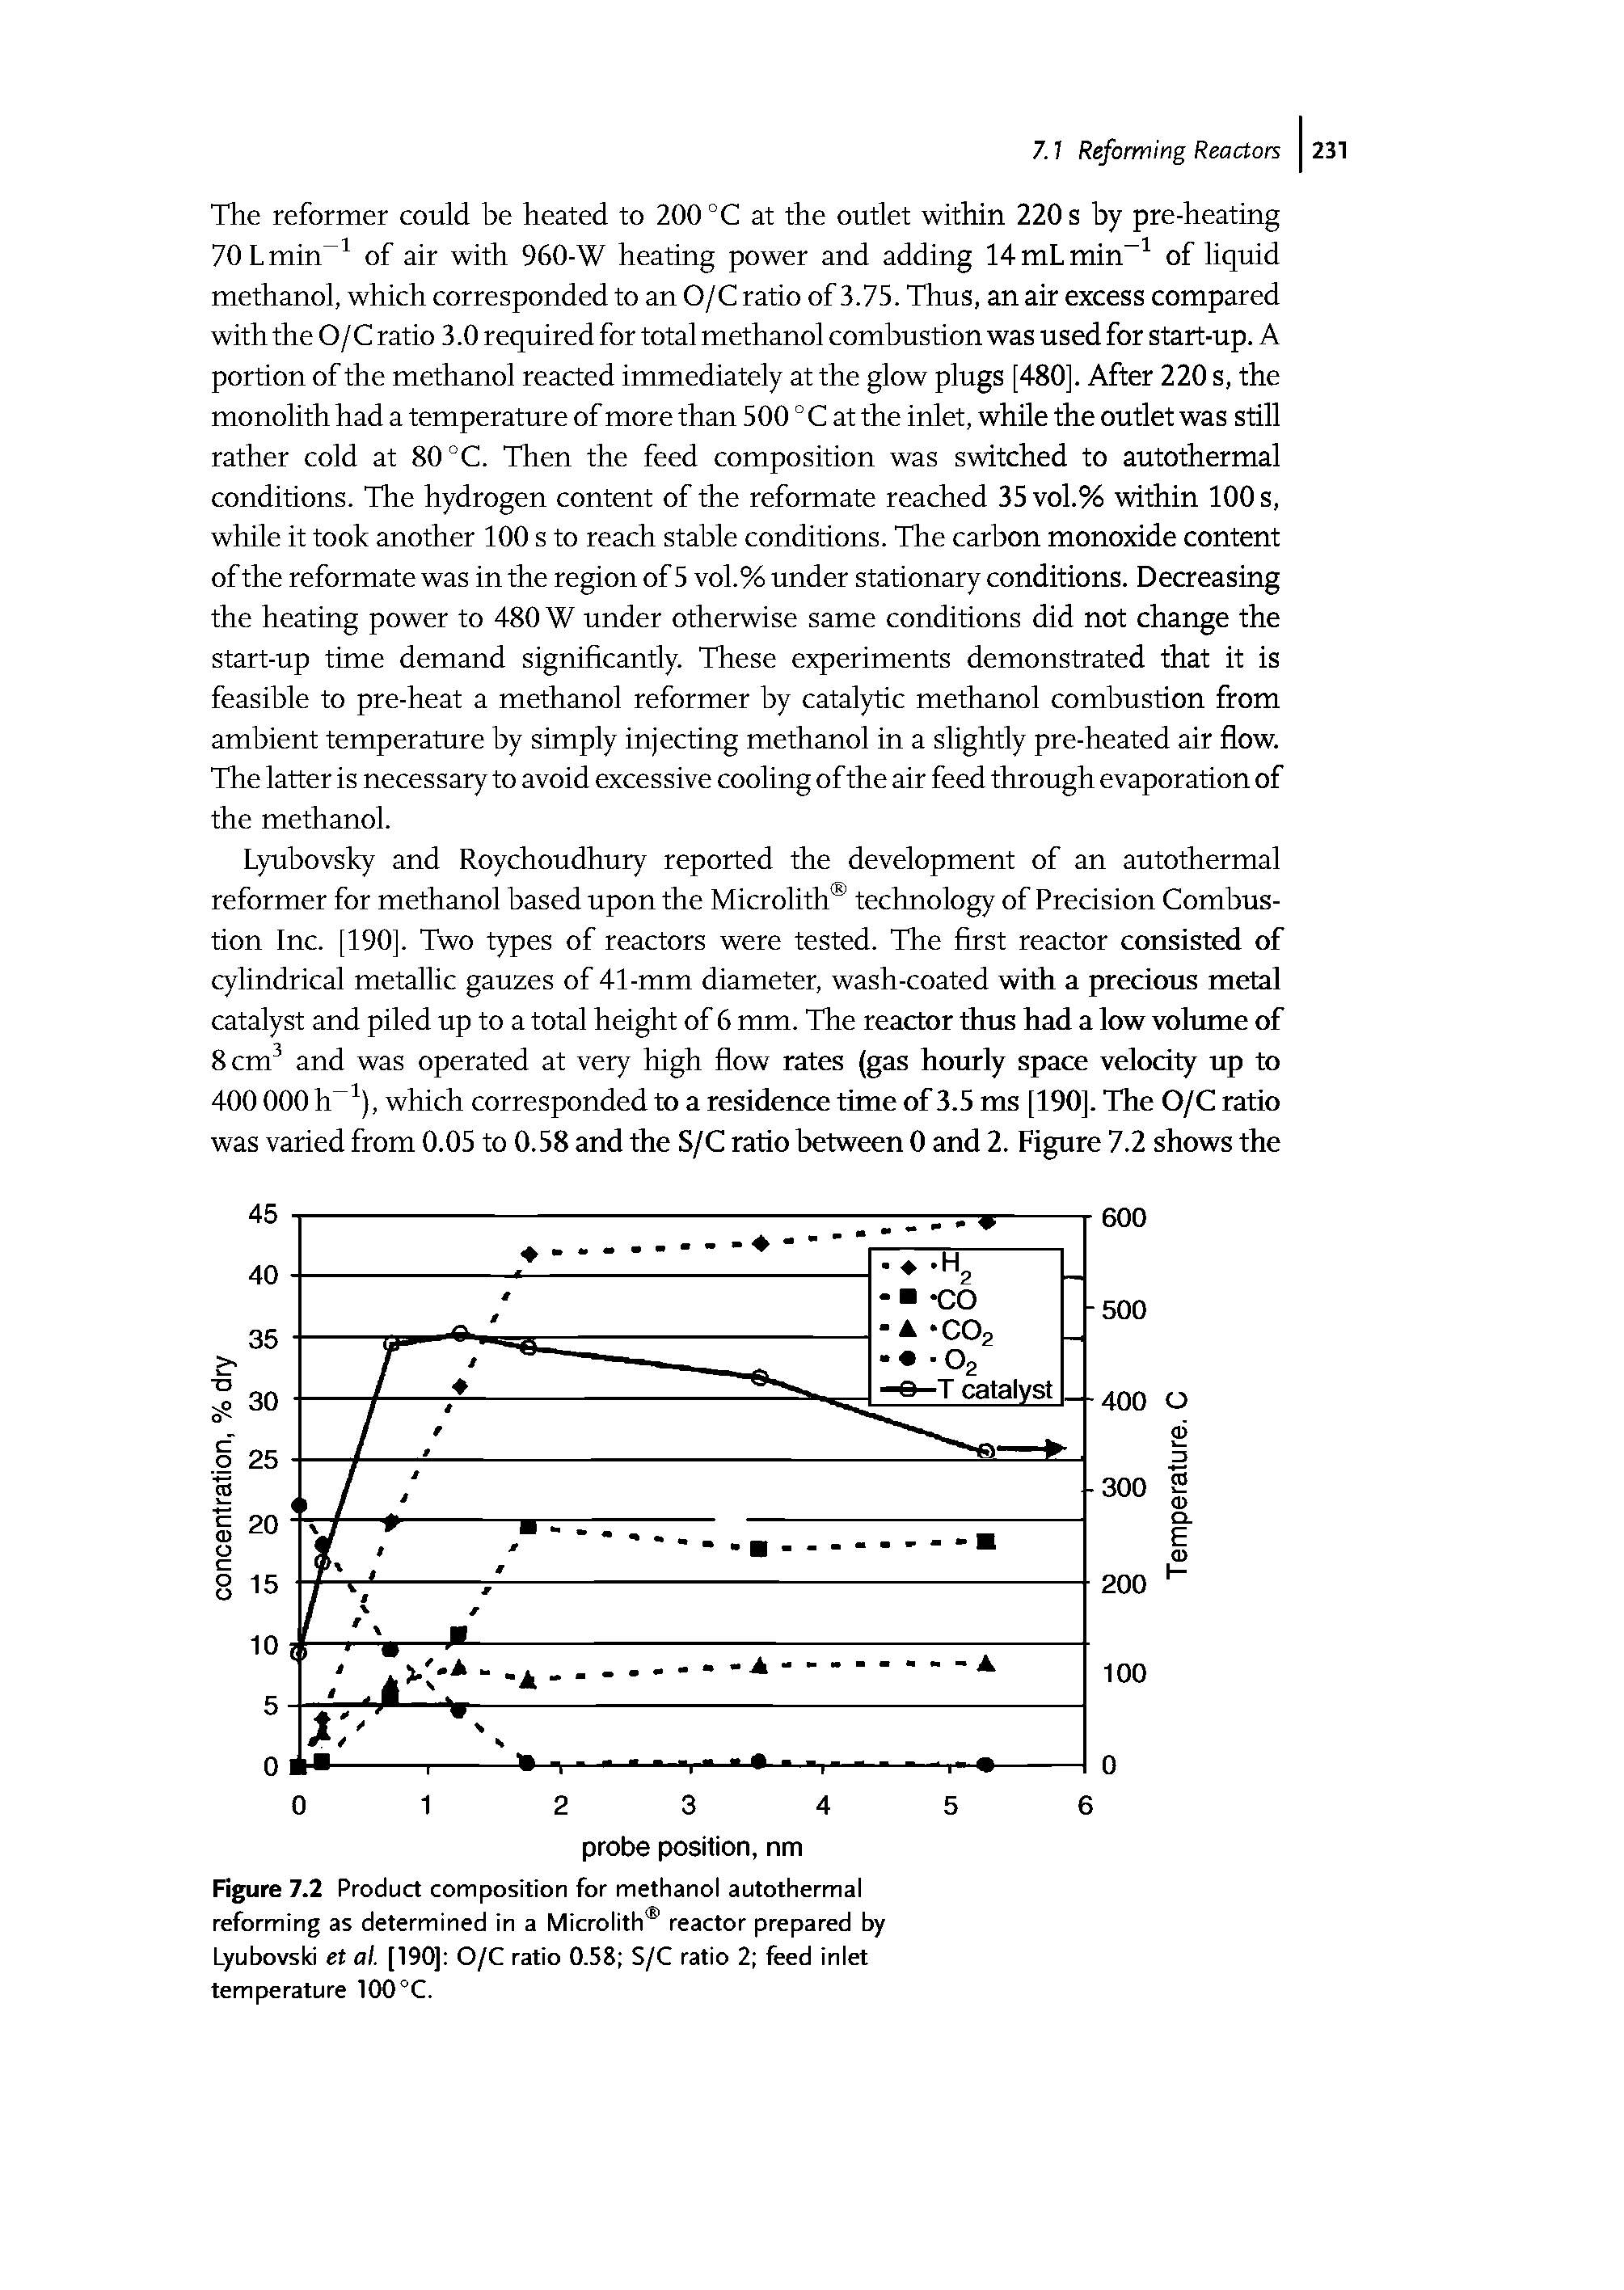 Figure 7.2 Product composition for methanol autothermal reforming as determined in a Microlith reactor prepared by Lyubovsld et al. [190] O/C ratio 0.58 S/C ratio 2 feed inlet temperature 100°C.